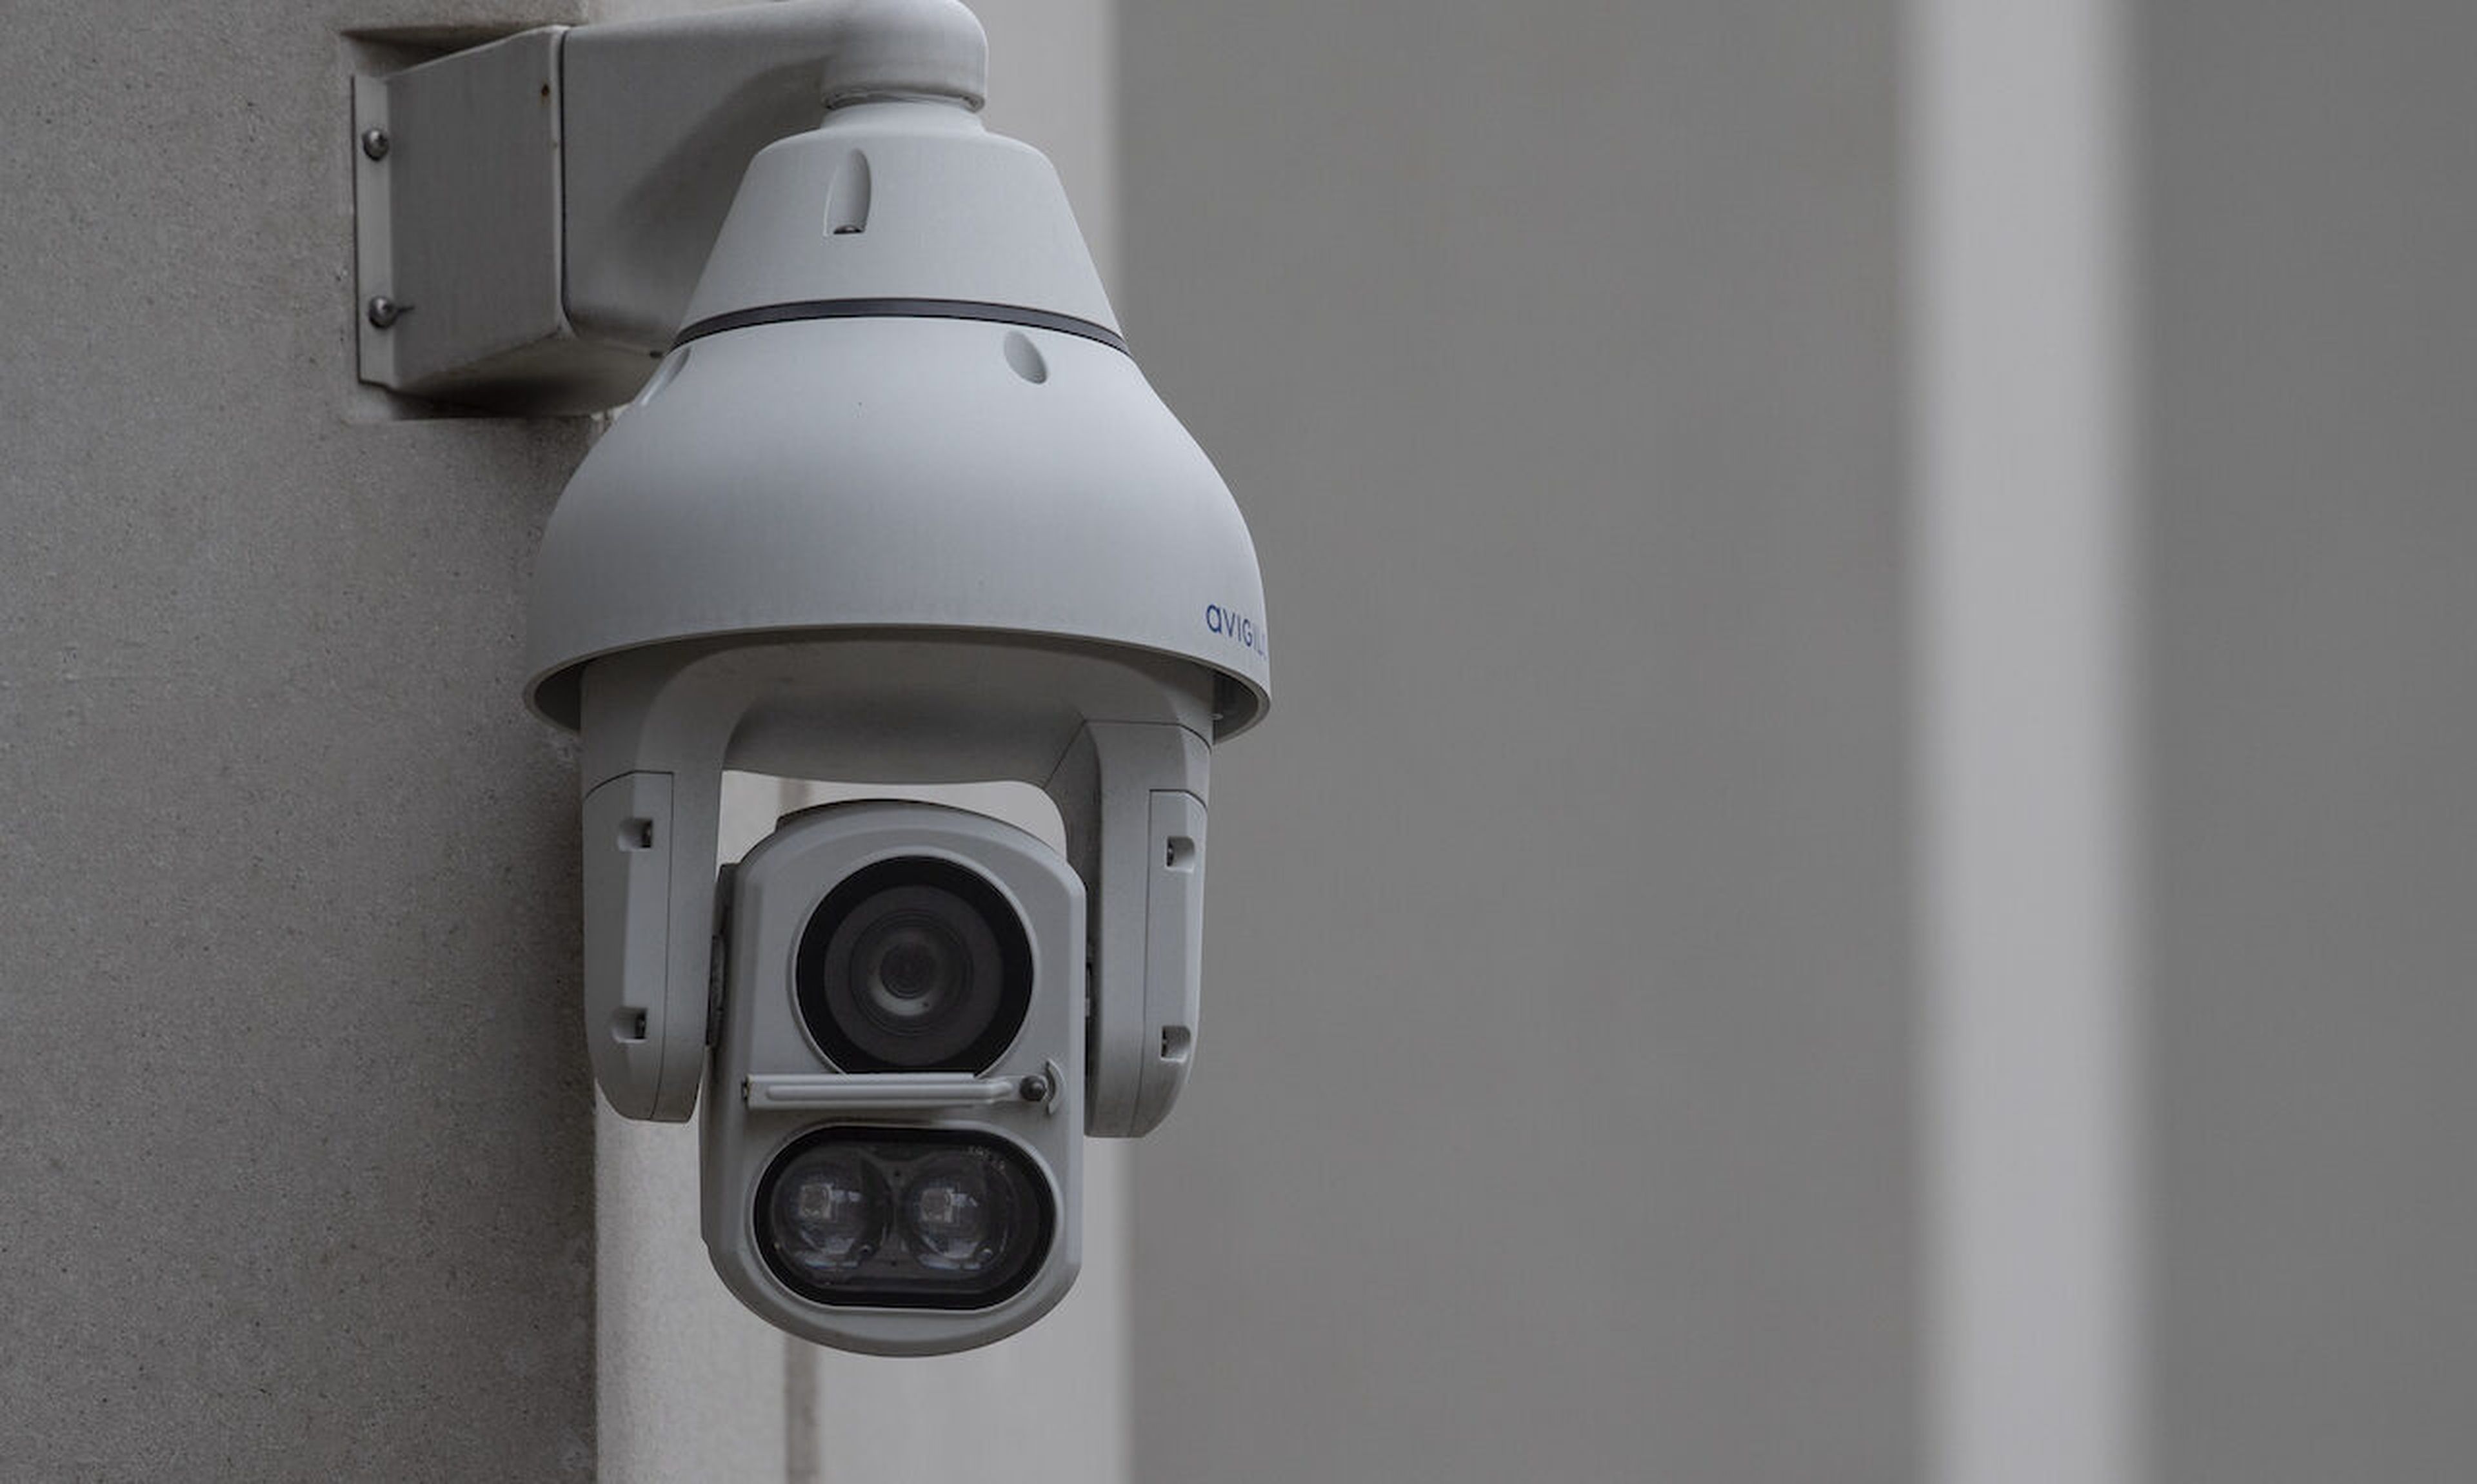 A CCTV camera in Pancras Square near Kings Cross Station on August 16, 2019 in London, England. CCTV cameras using facial-recognition systems at King&#8217;s Cross are to be investigated by the UK&#8217;s data-protection watchdog after a report by the Financial Times. (Photo by Dan Kitwood/Getty Images)